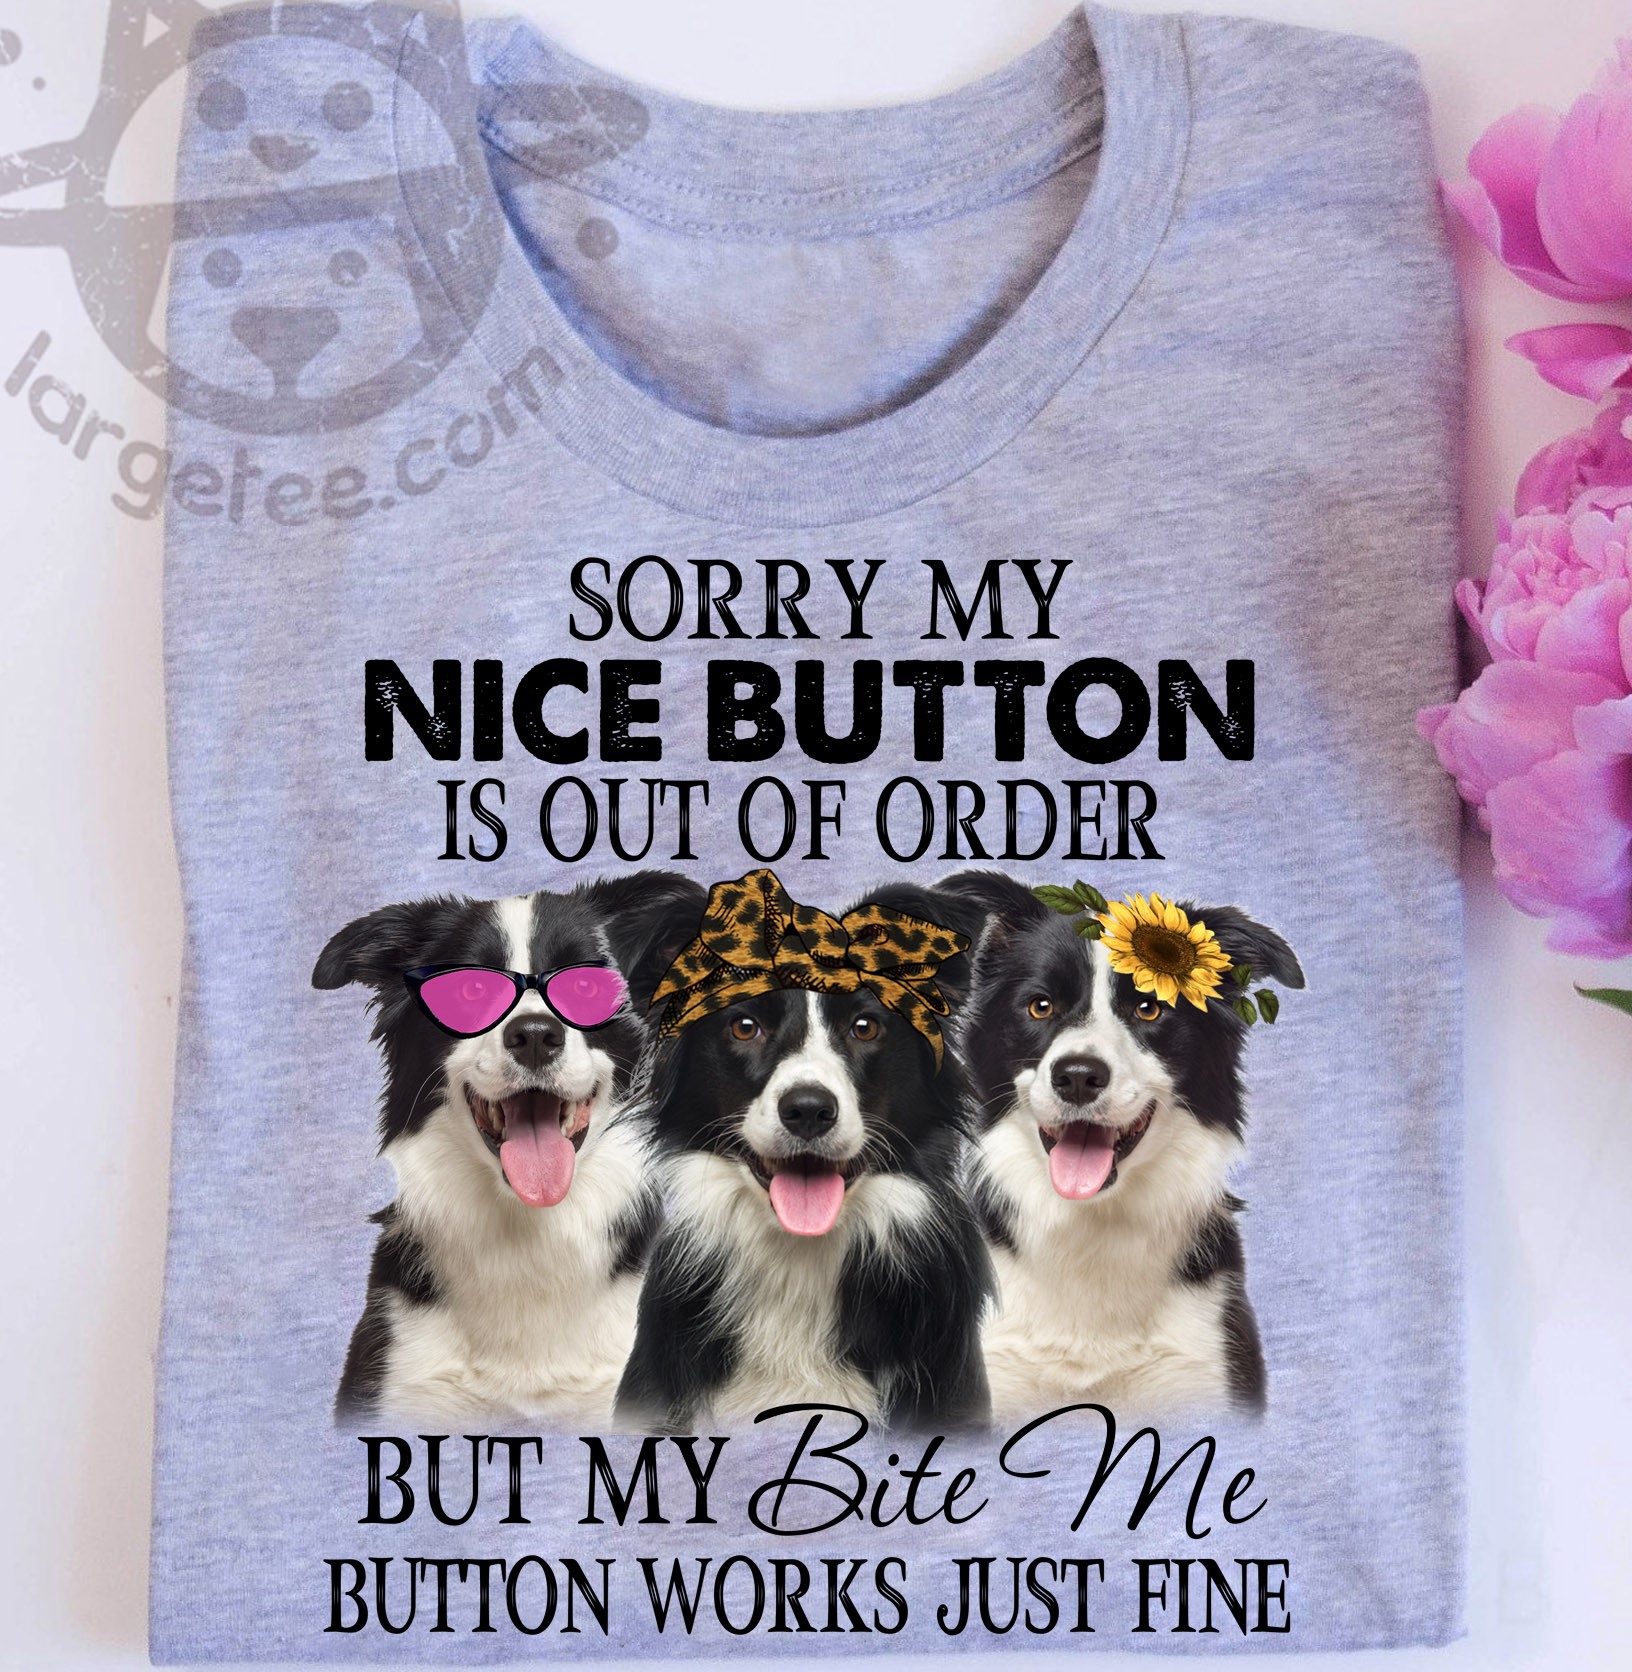 Sorry my nice button is out of order but my bite me button works just fine - Border Collie dog